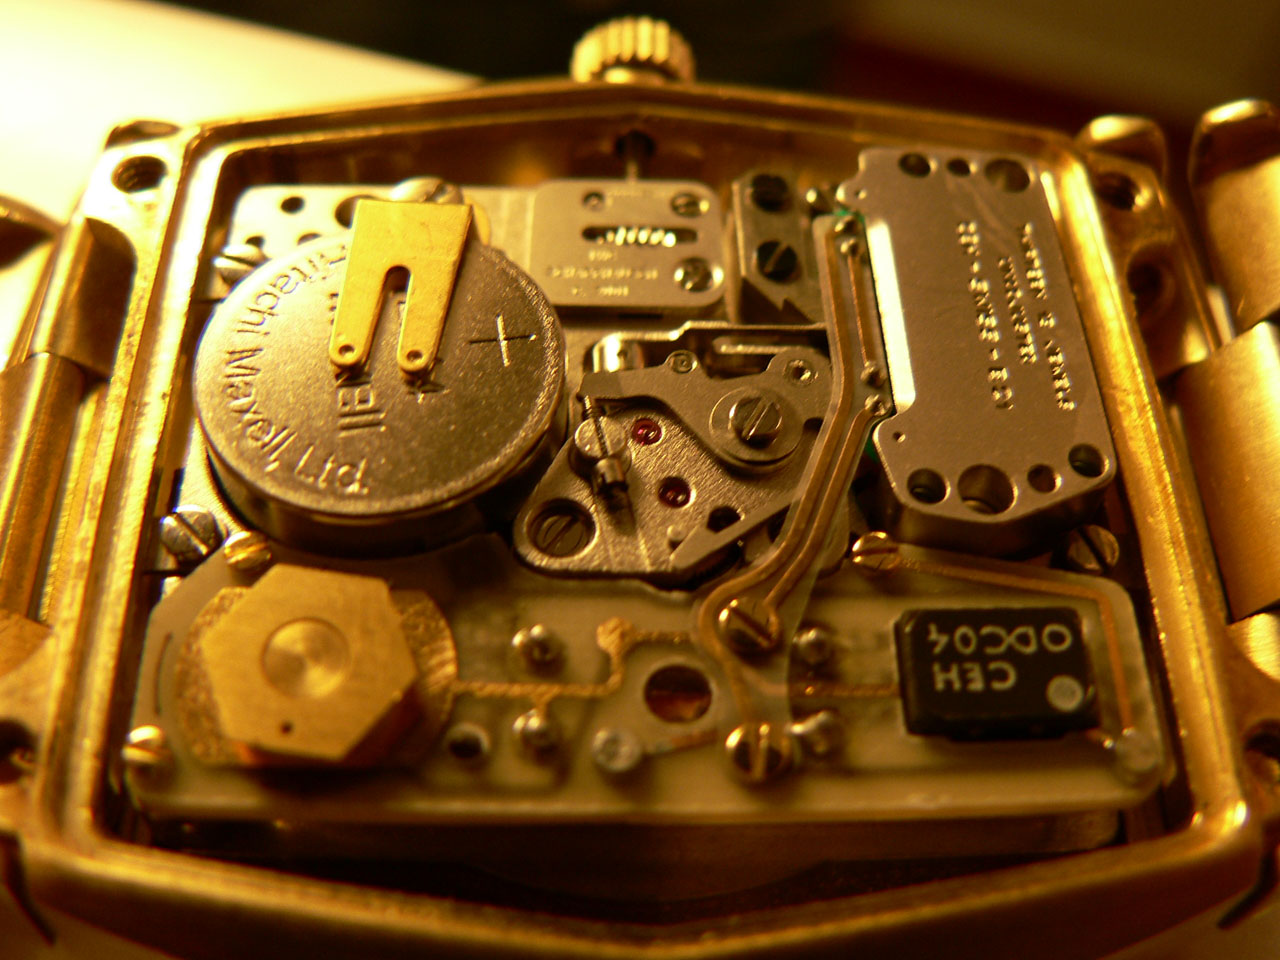 Tag Heuer Replica Watches Precision